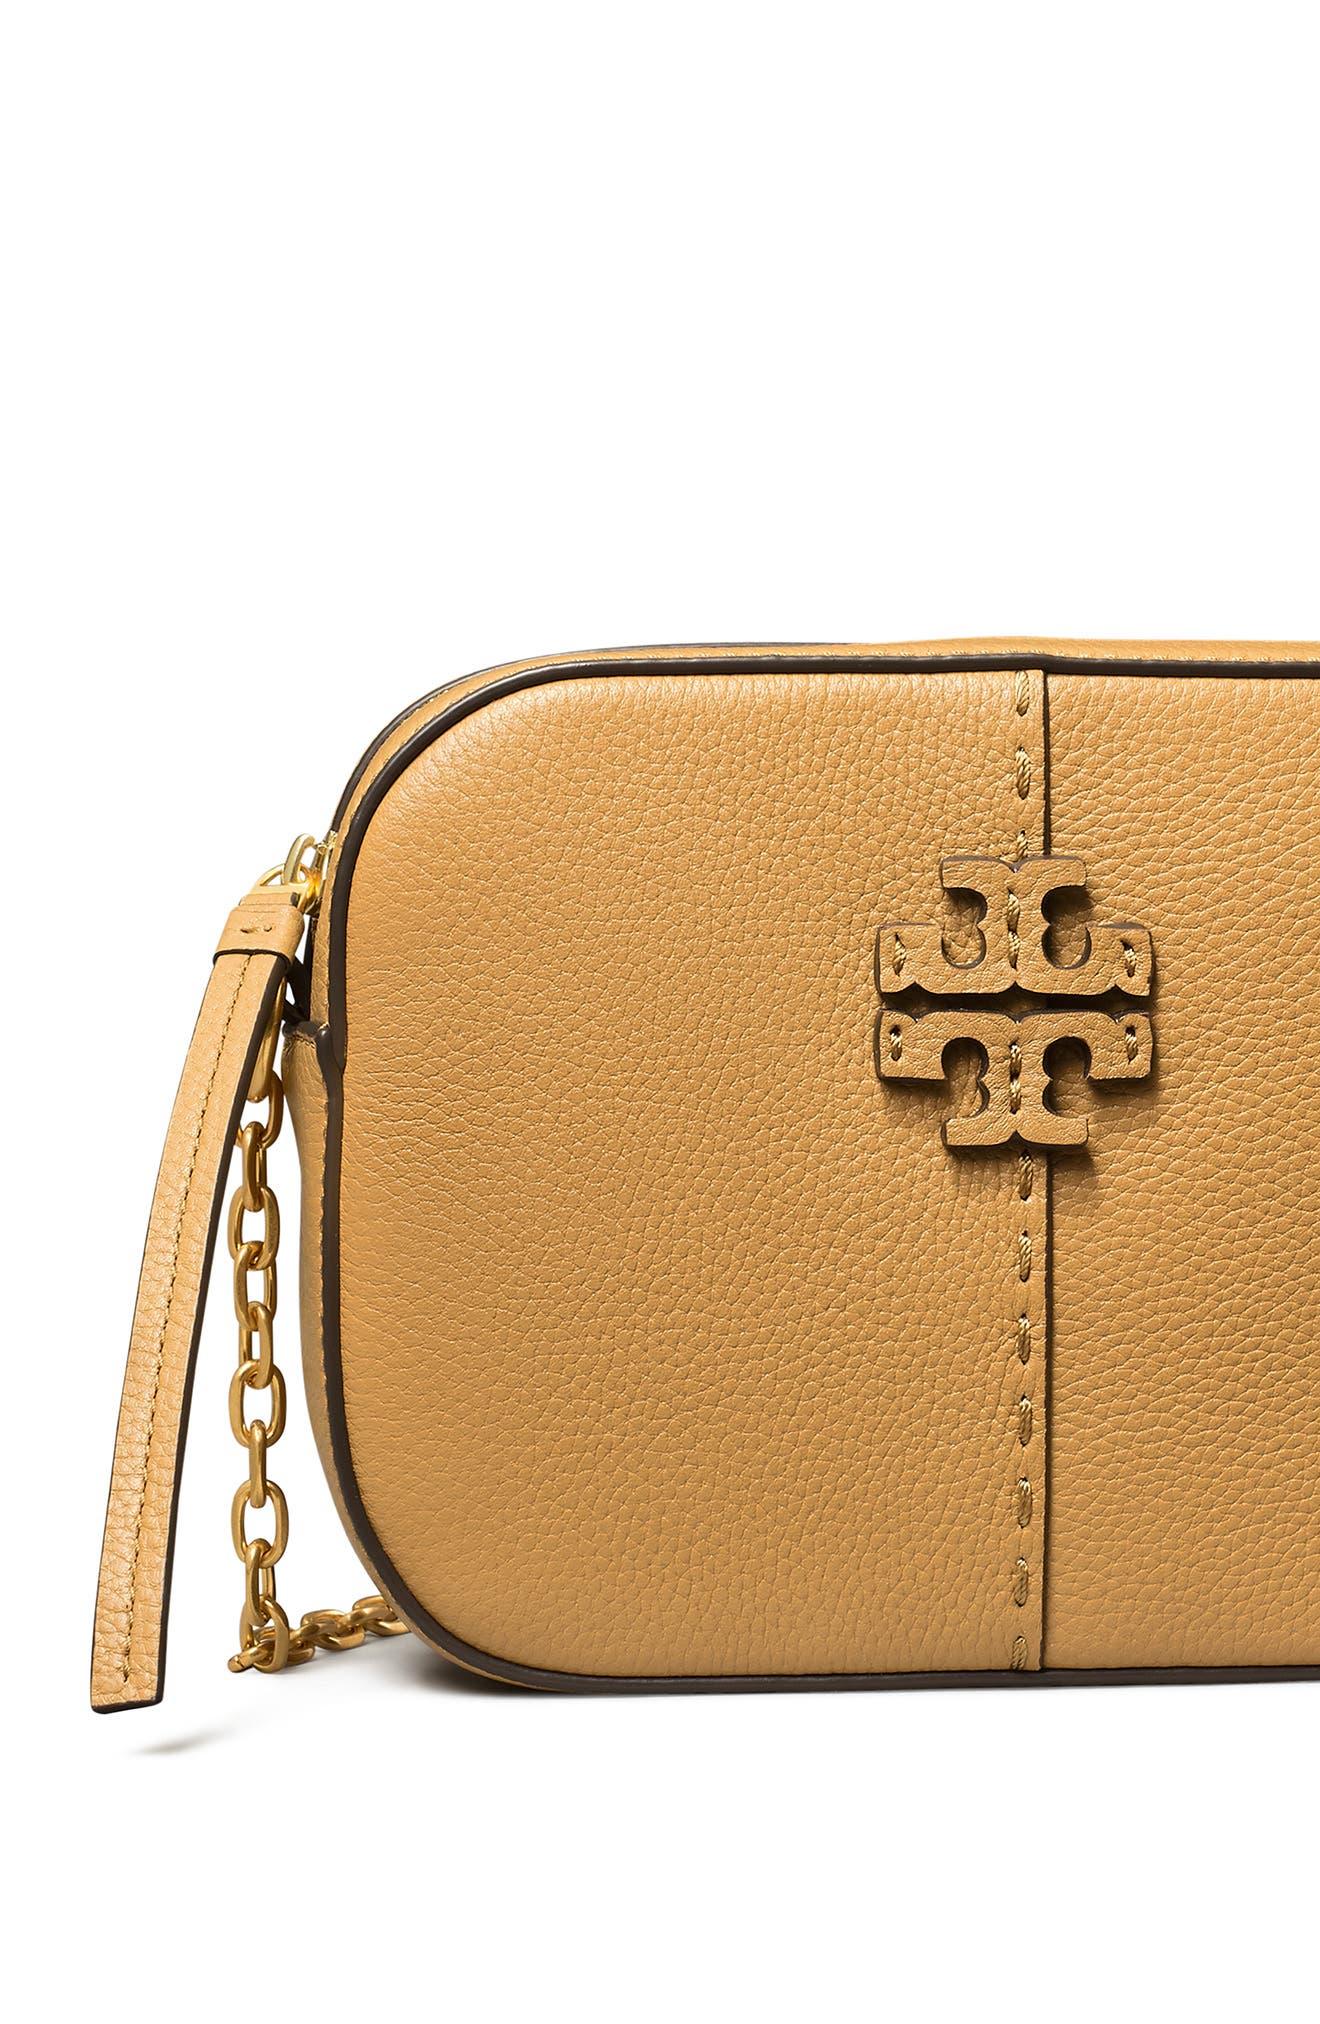 AUTH NWT TORY BURCH McGraw Camera Tassels Pebbled Leather Crossbody In Brie